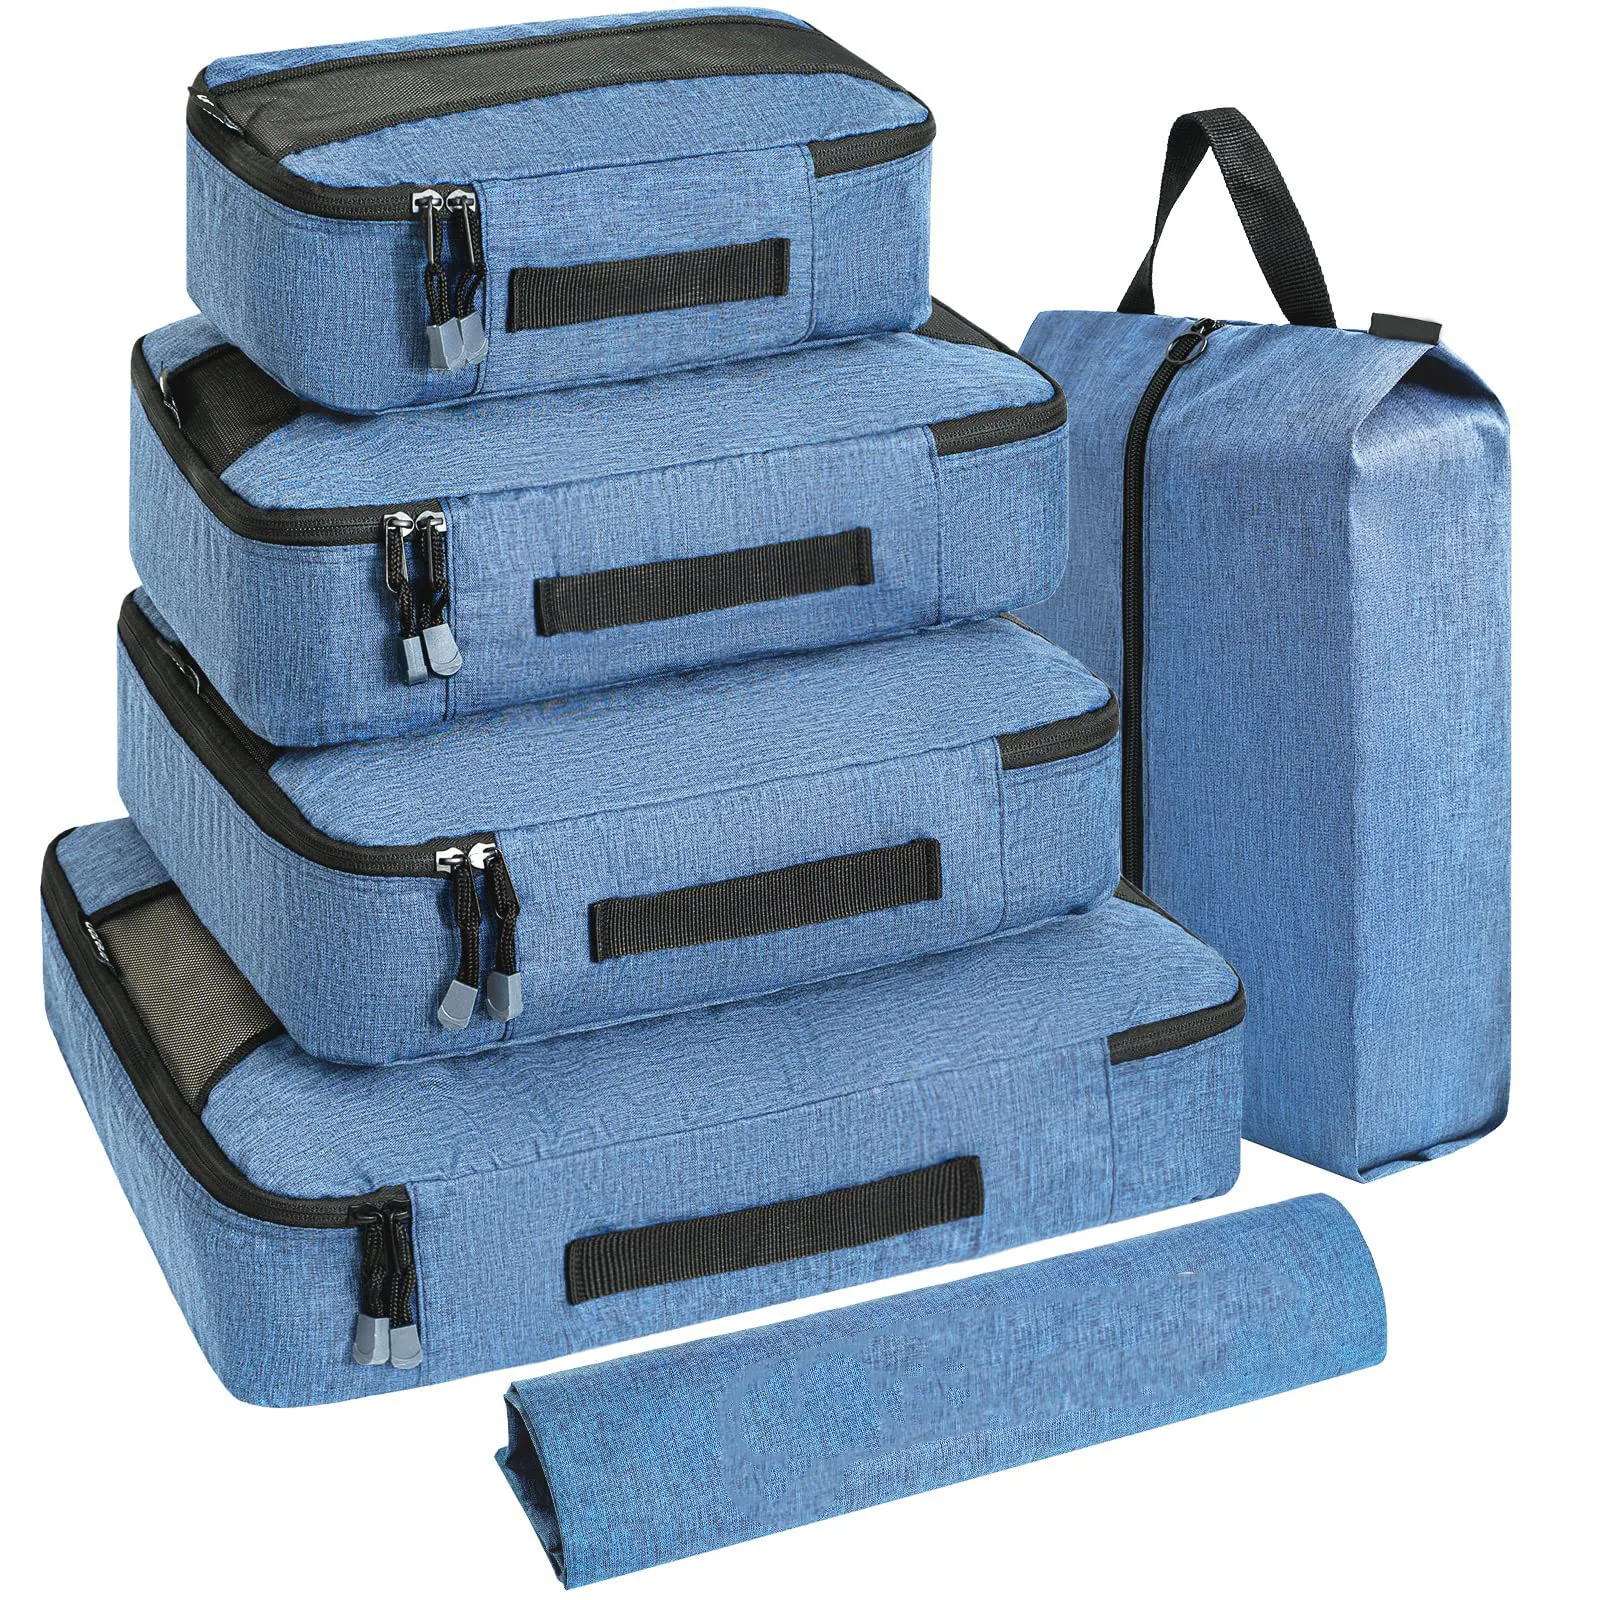 WellPromotion Suitcase Organizers